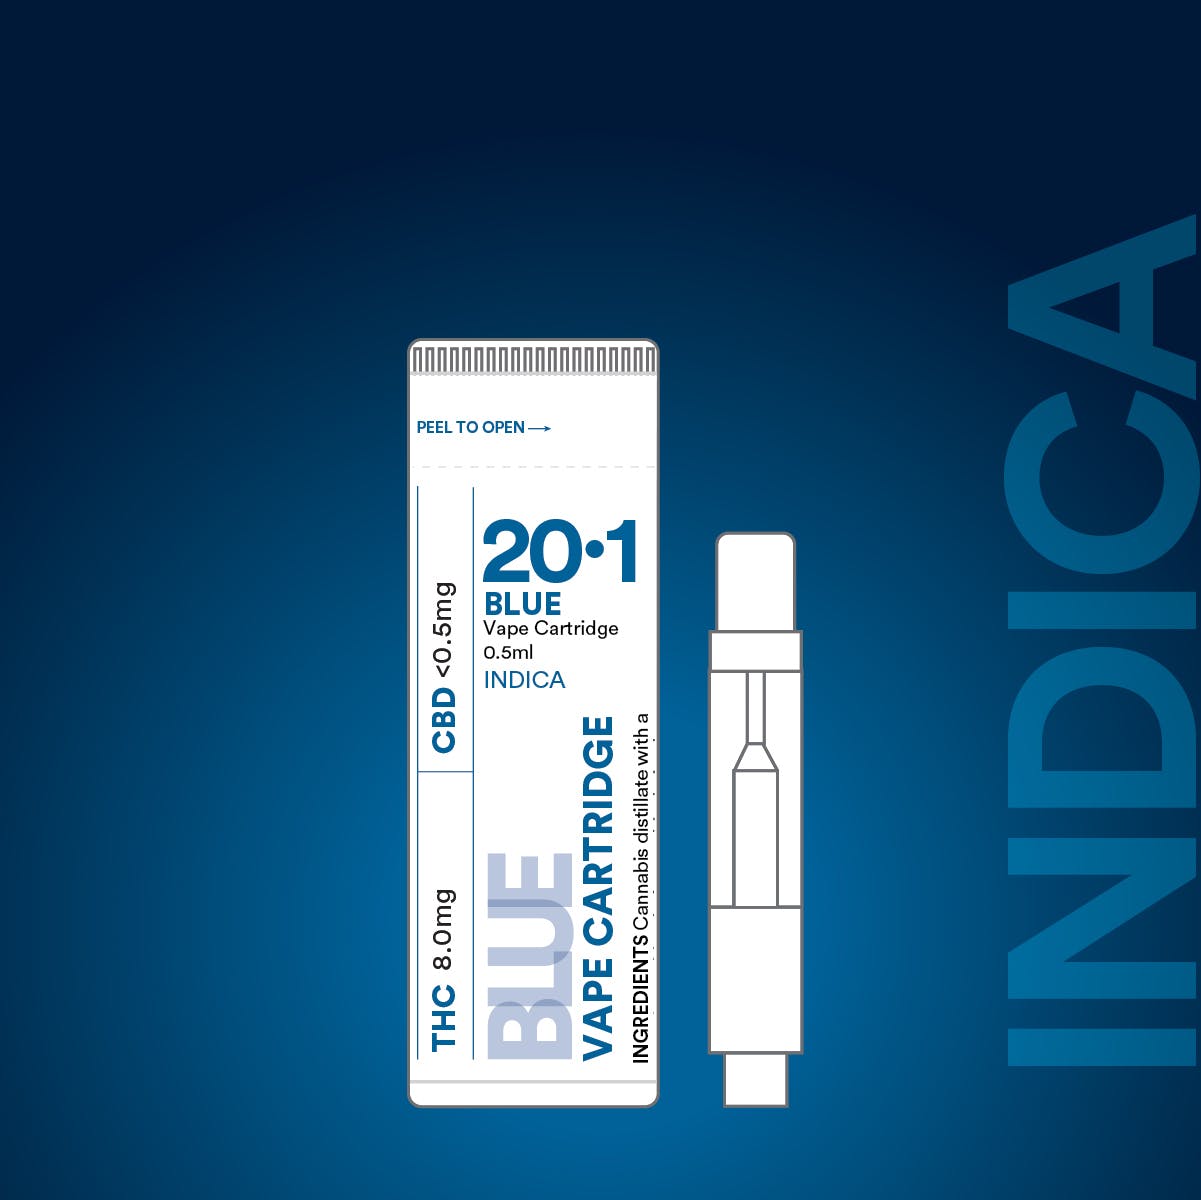 concentrate-pharmacann-blue-201-indica-vape